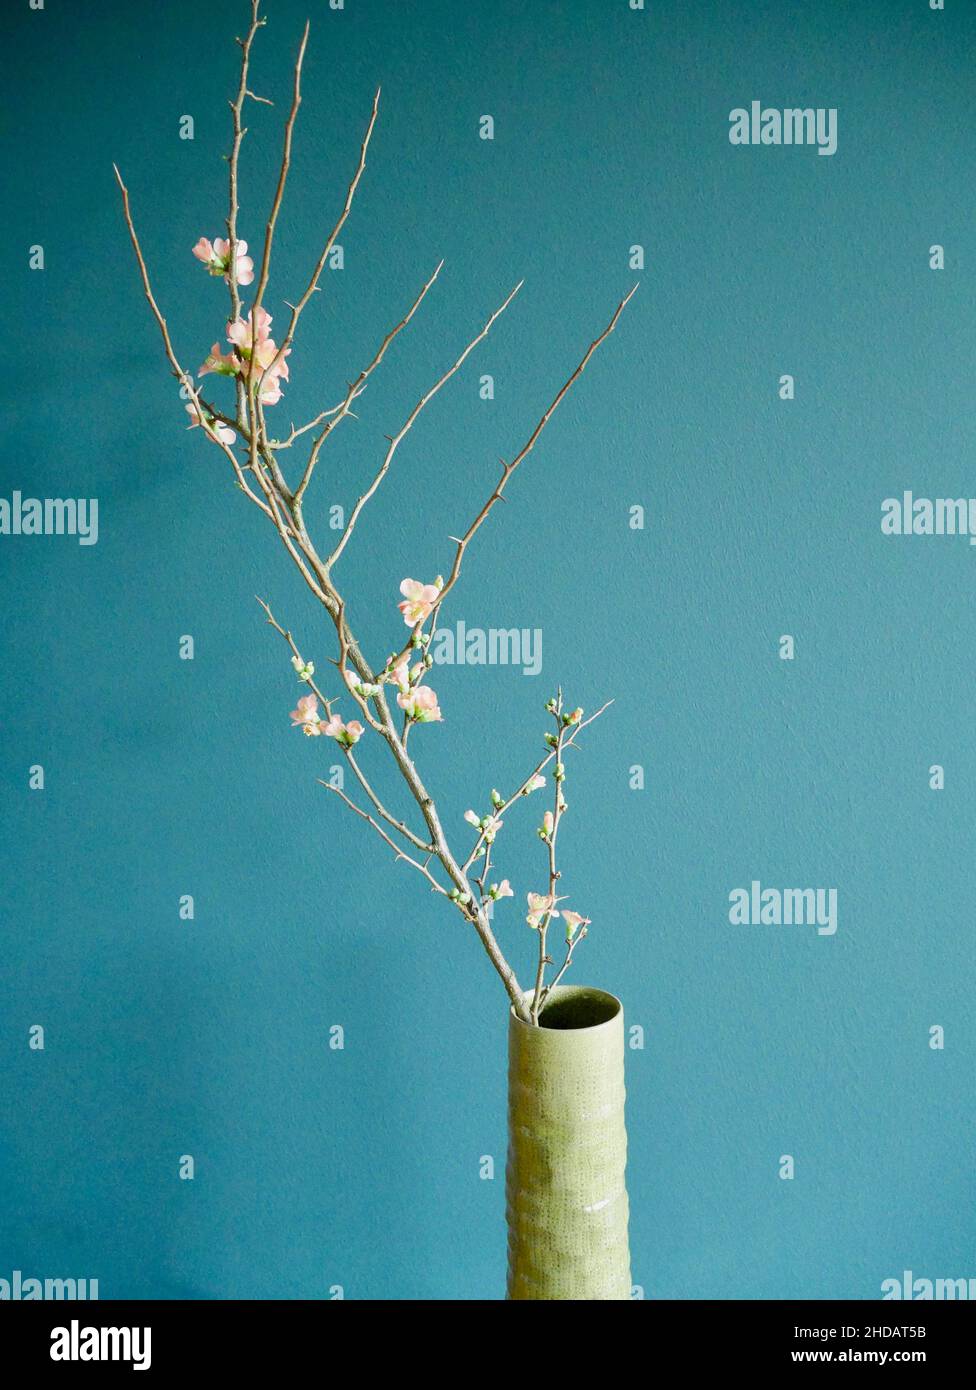 Blooming quince branch in green ceramic vase against petrol wall. Natural floristics. Stock Photo